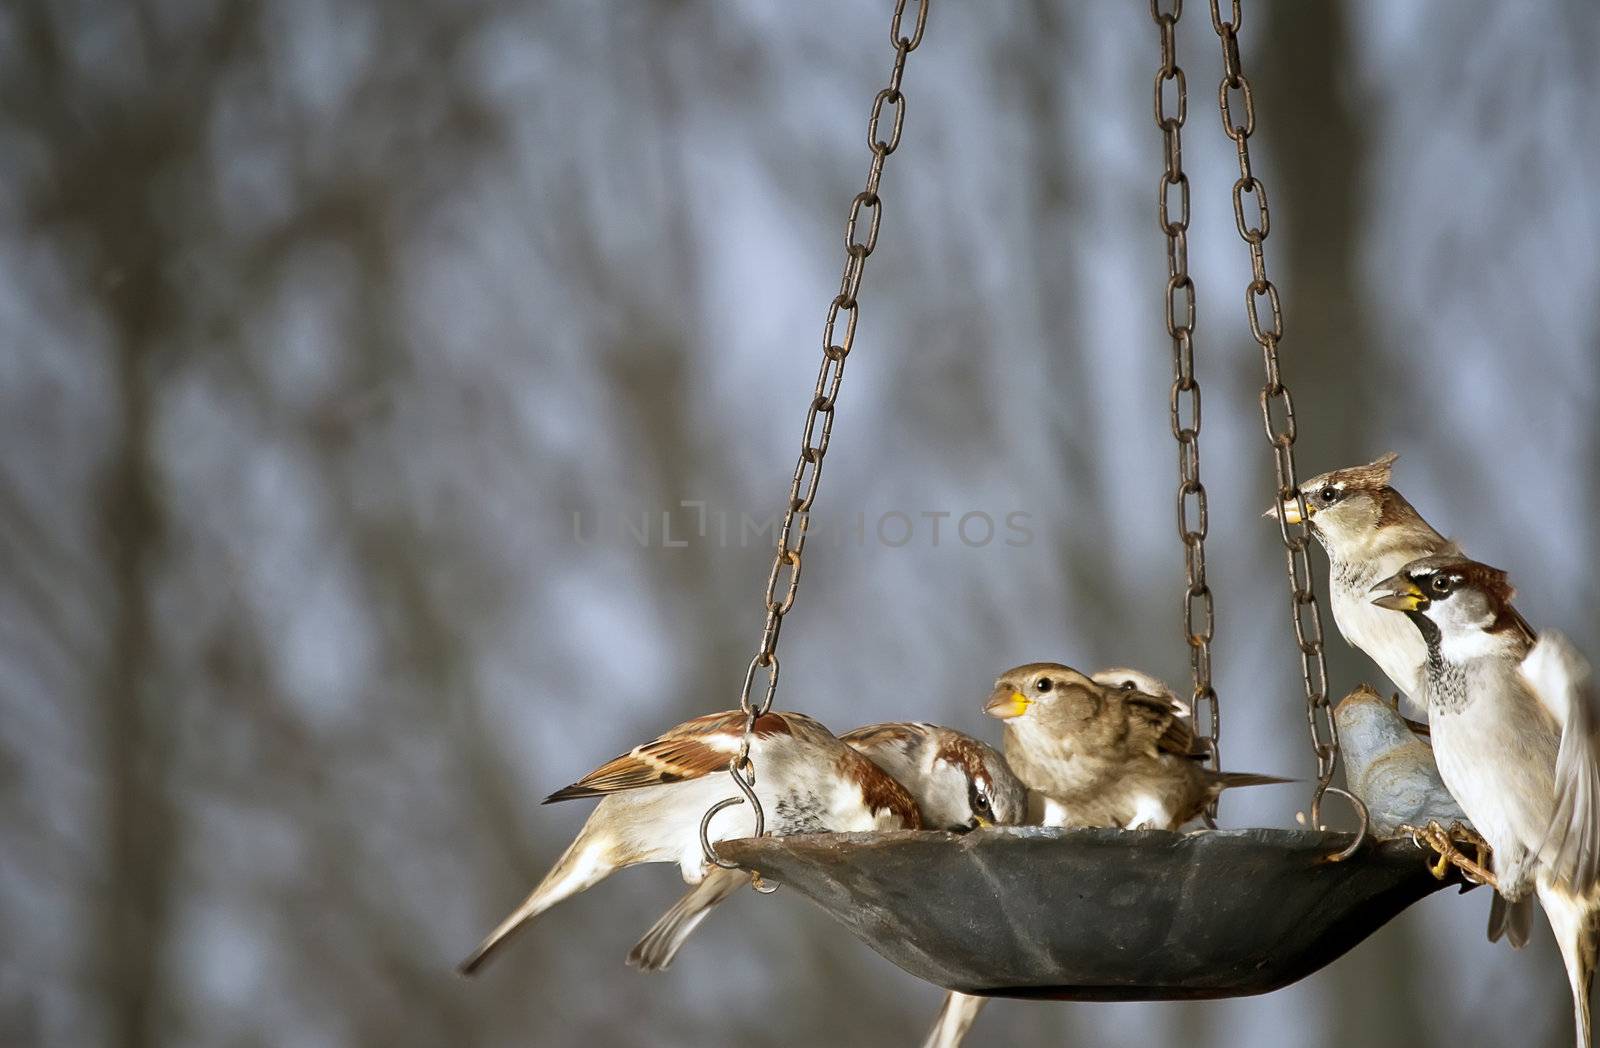 Sparrows at the bird feeder by rcarner